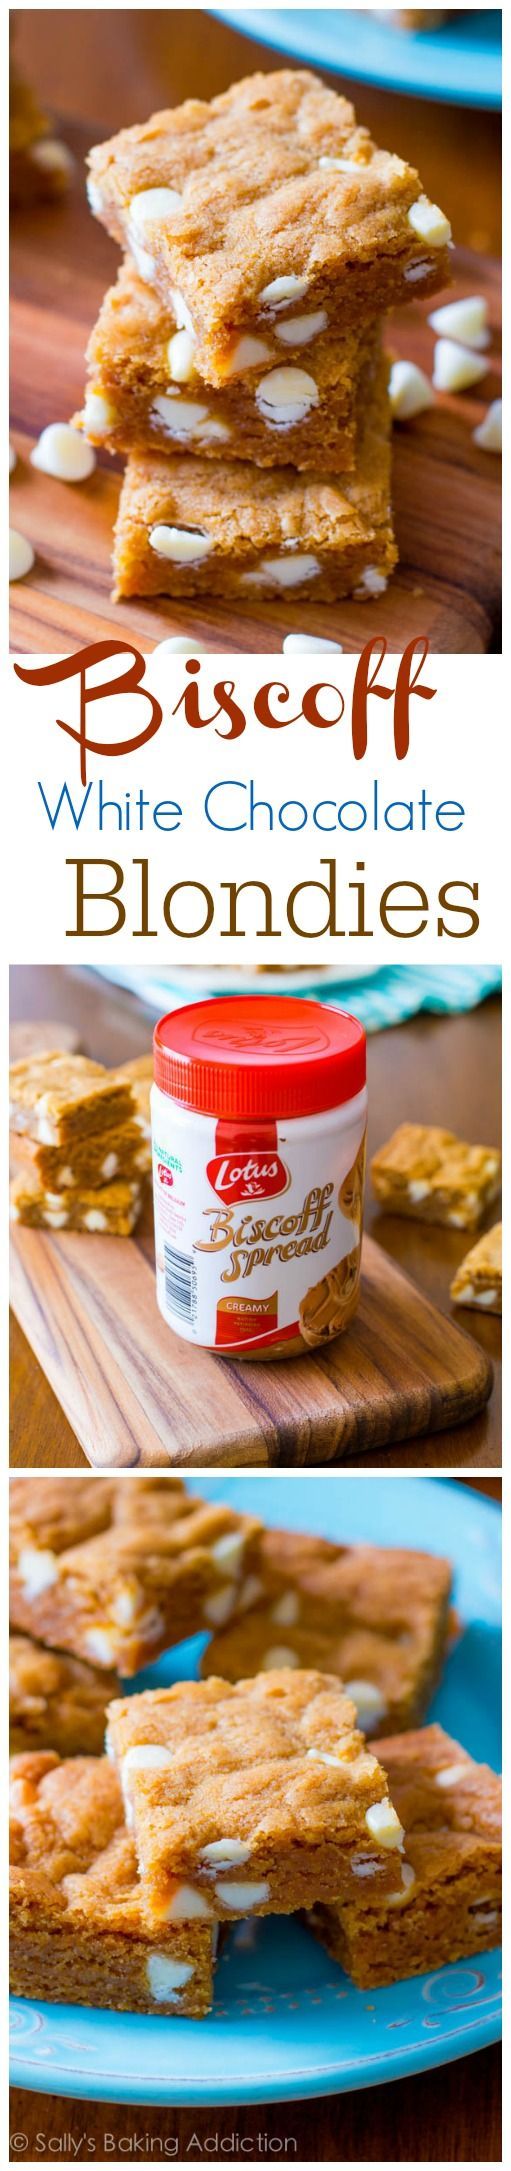 Brown Sugar Biscoff Blondies – full of white chocolate chips. These are so simple, yet soooo good. I recommend double batches!